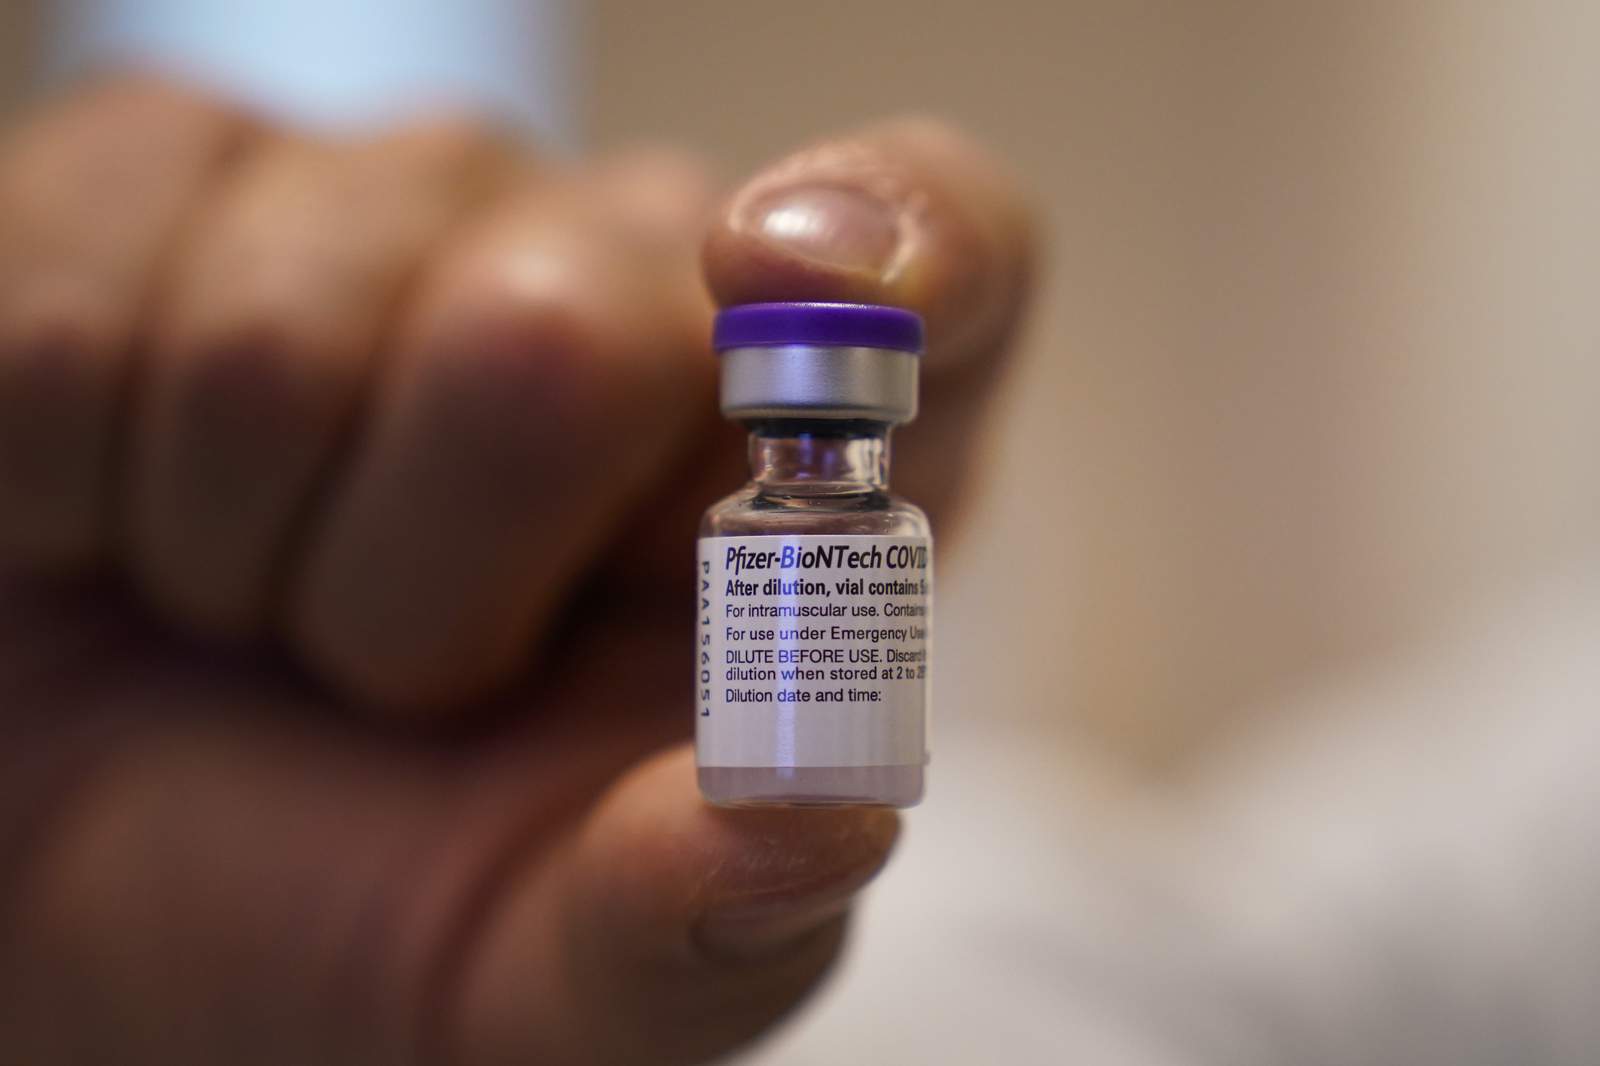 Virginia’s health care workers start receiving vaccinations